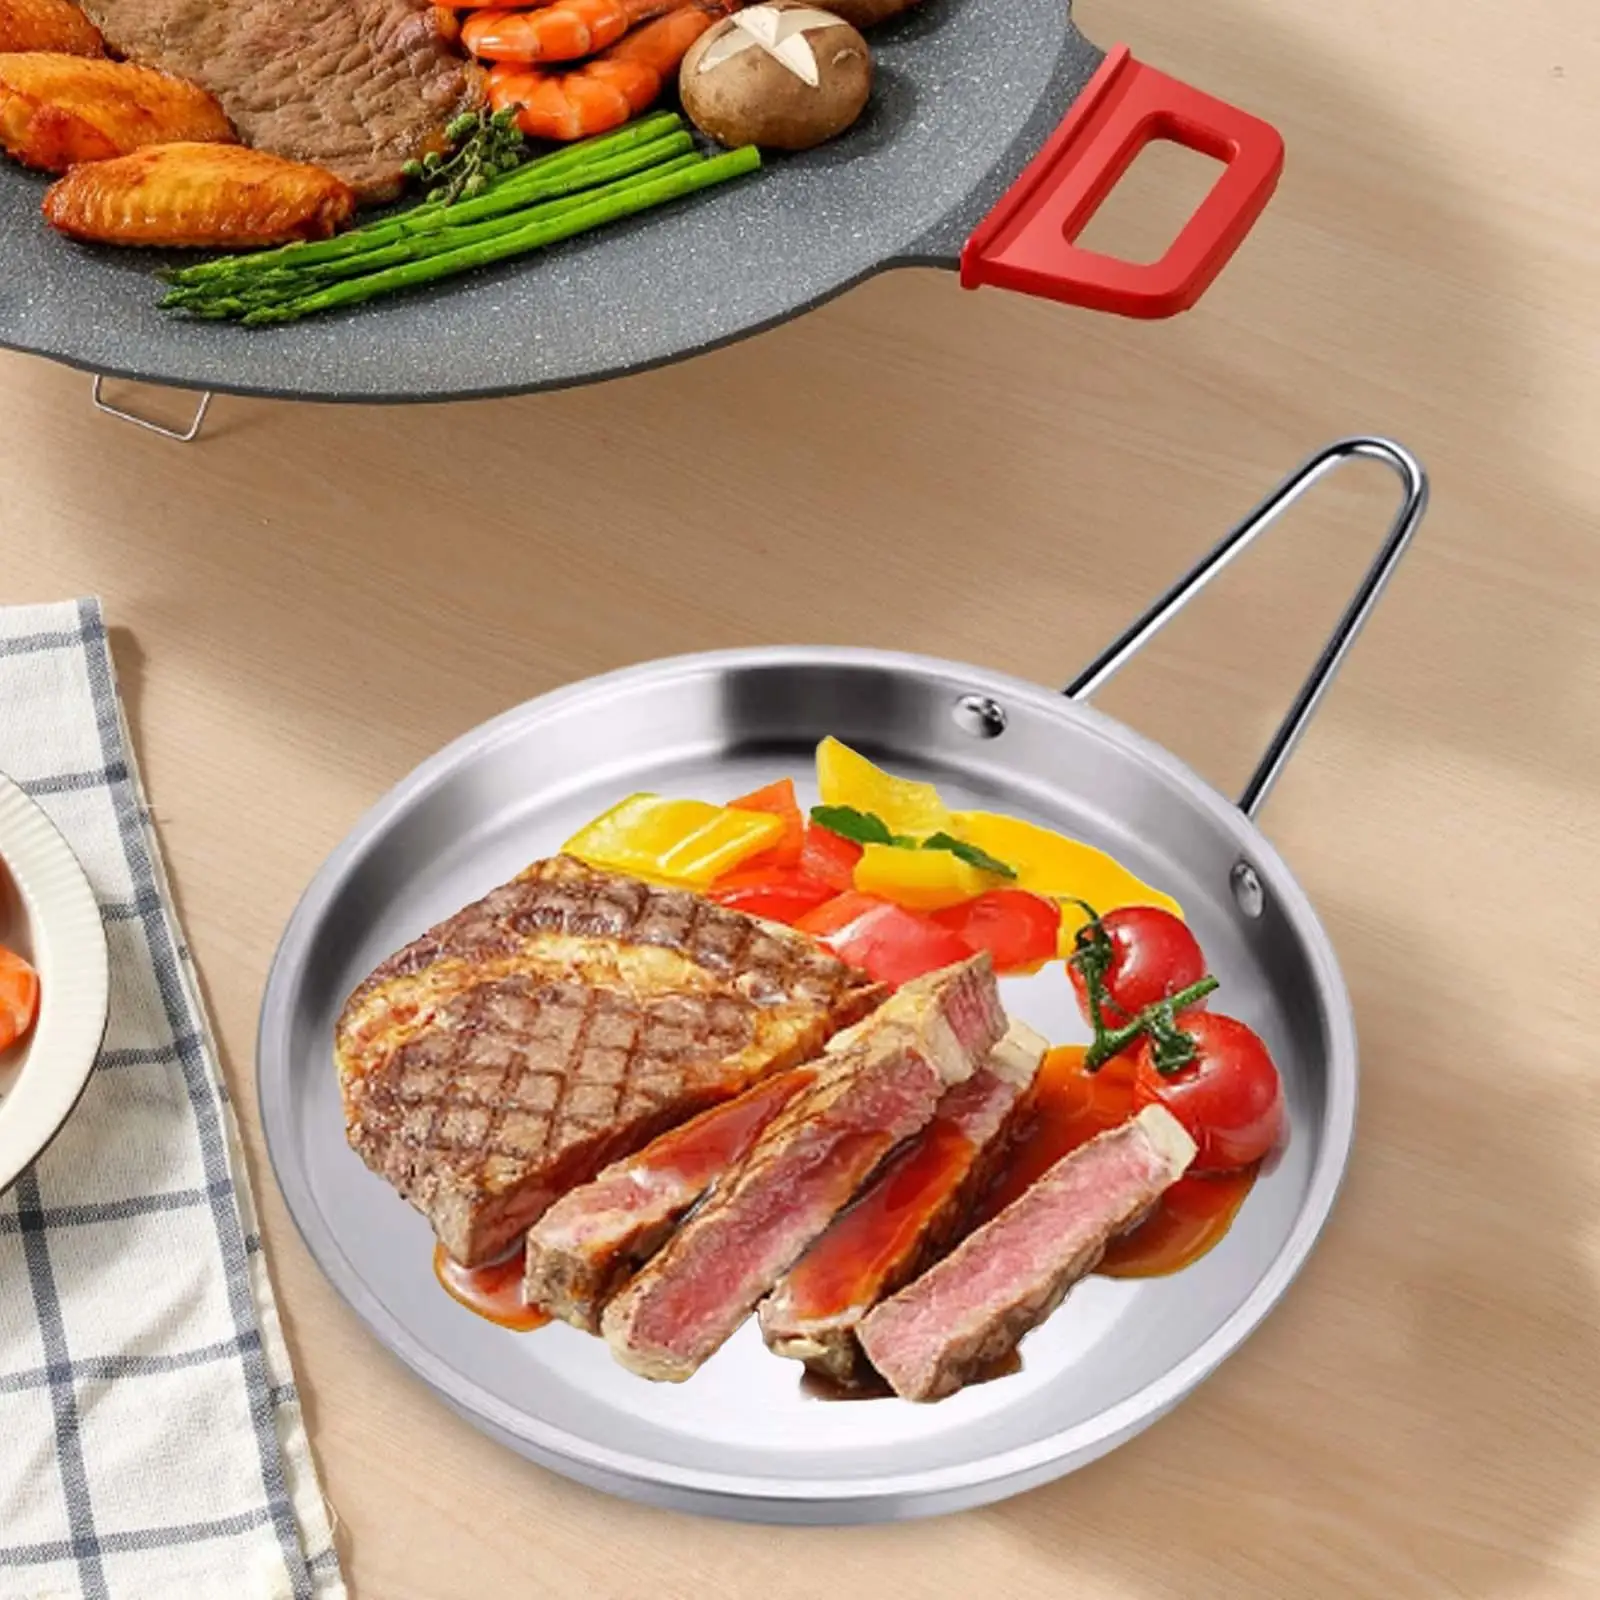 Serving Tray Steak Plate Food Storage Steak Tray Creative Decorative Serving Plate Dessert Tray for Hotel Coffee Bar Camping 